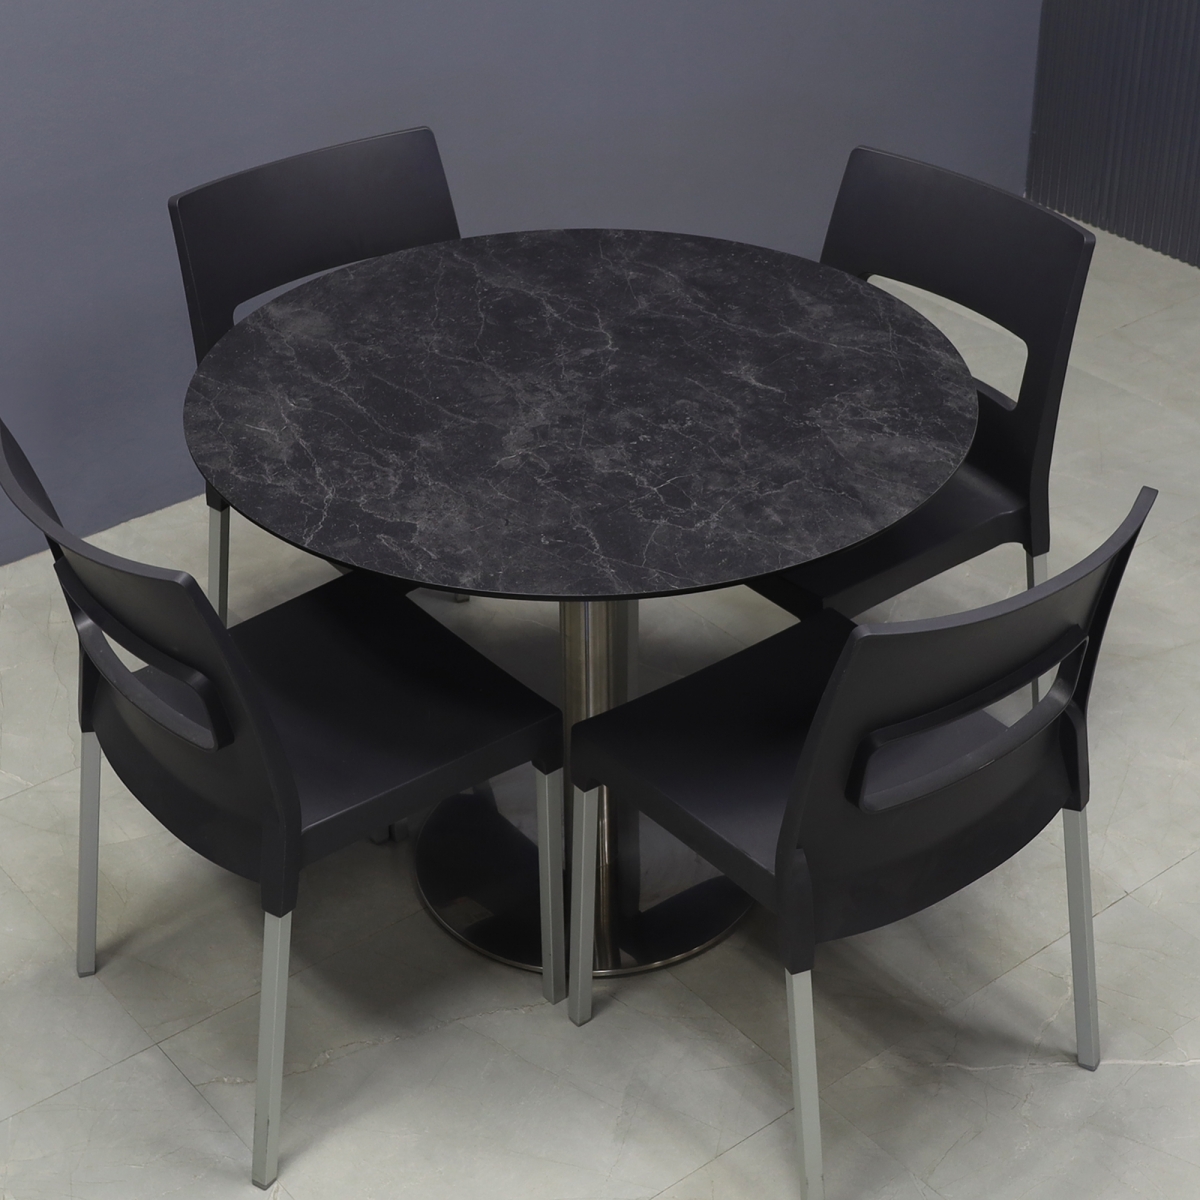 California Round Engineered Stone Cafeteria Table